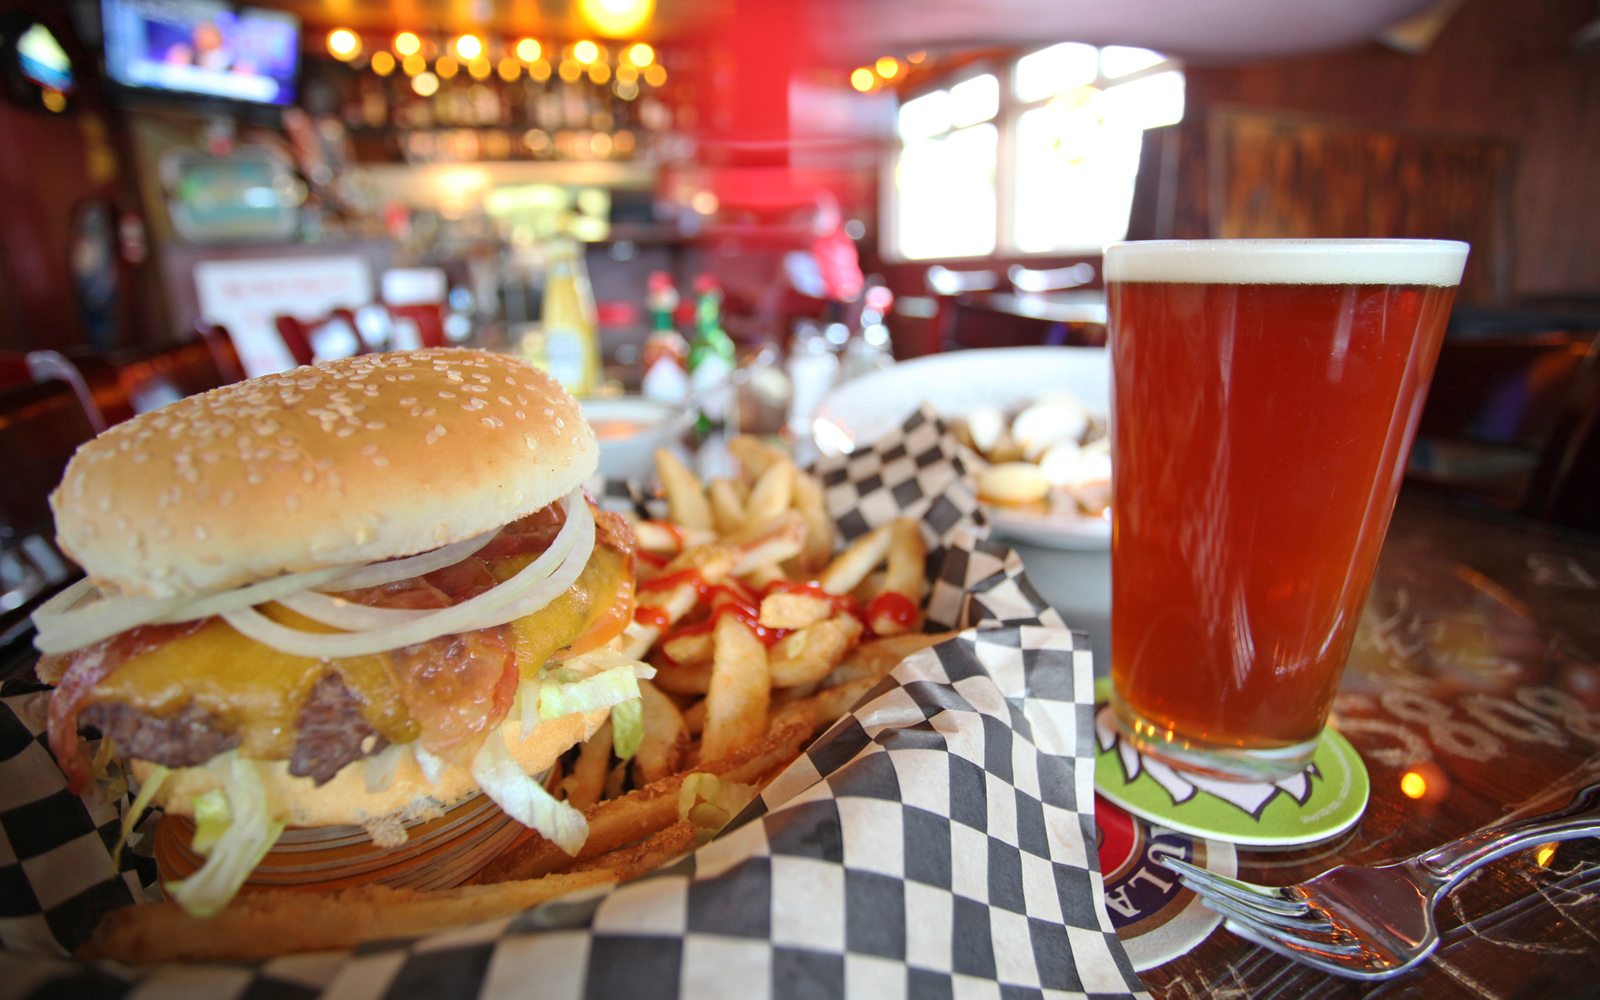 Burgers and a beer at U Street Pub & Eatery